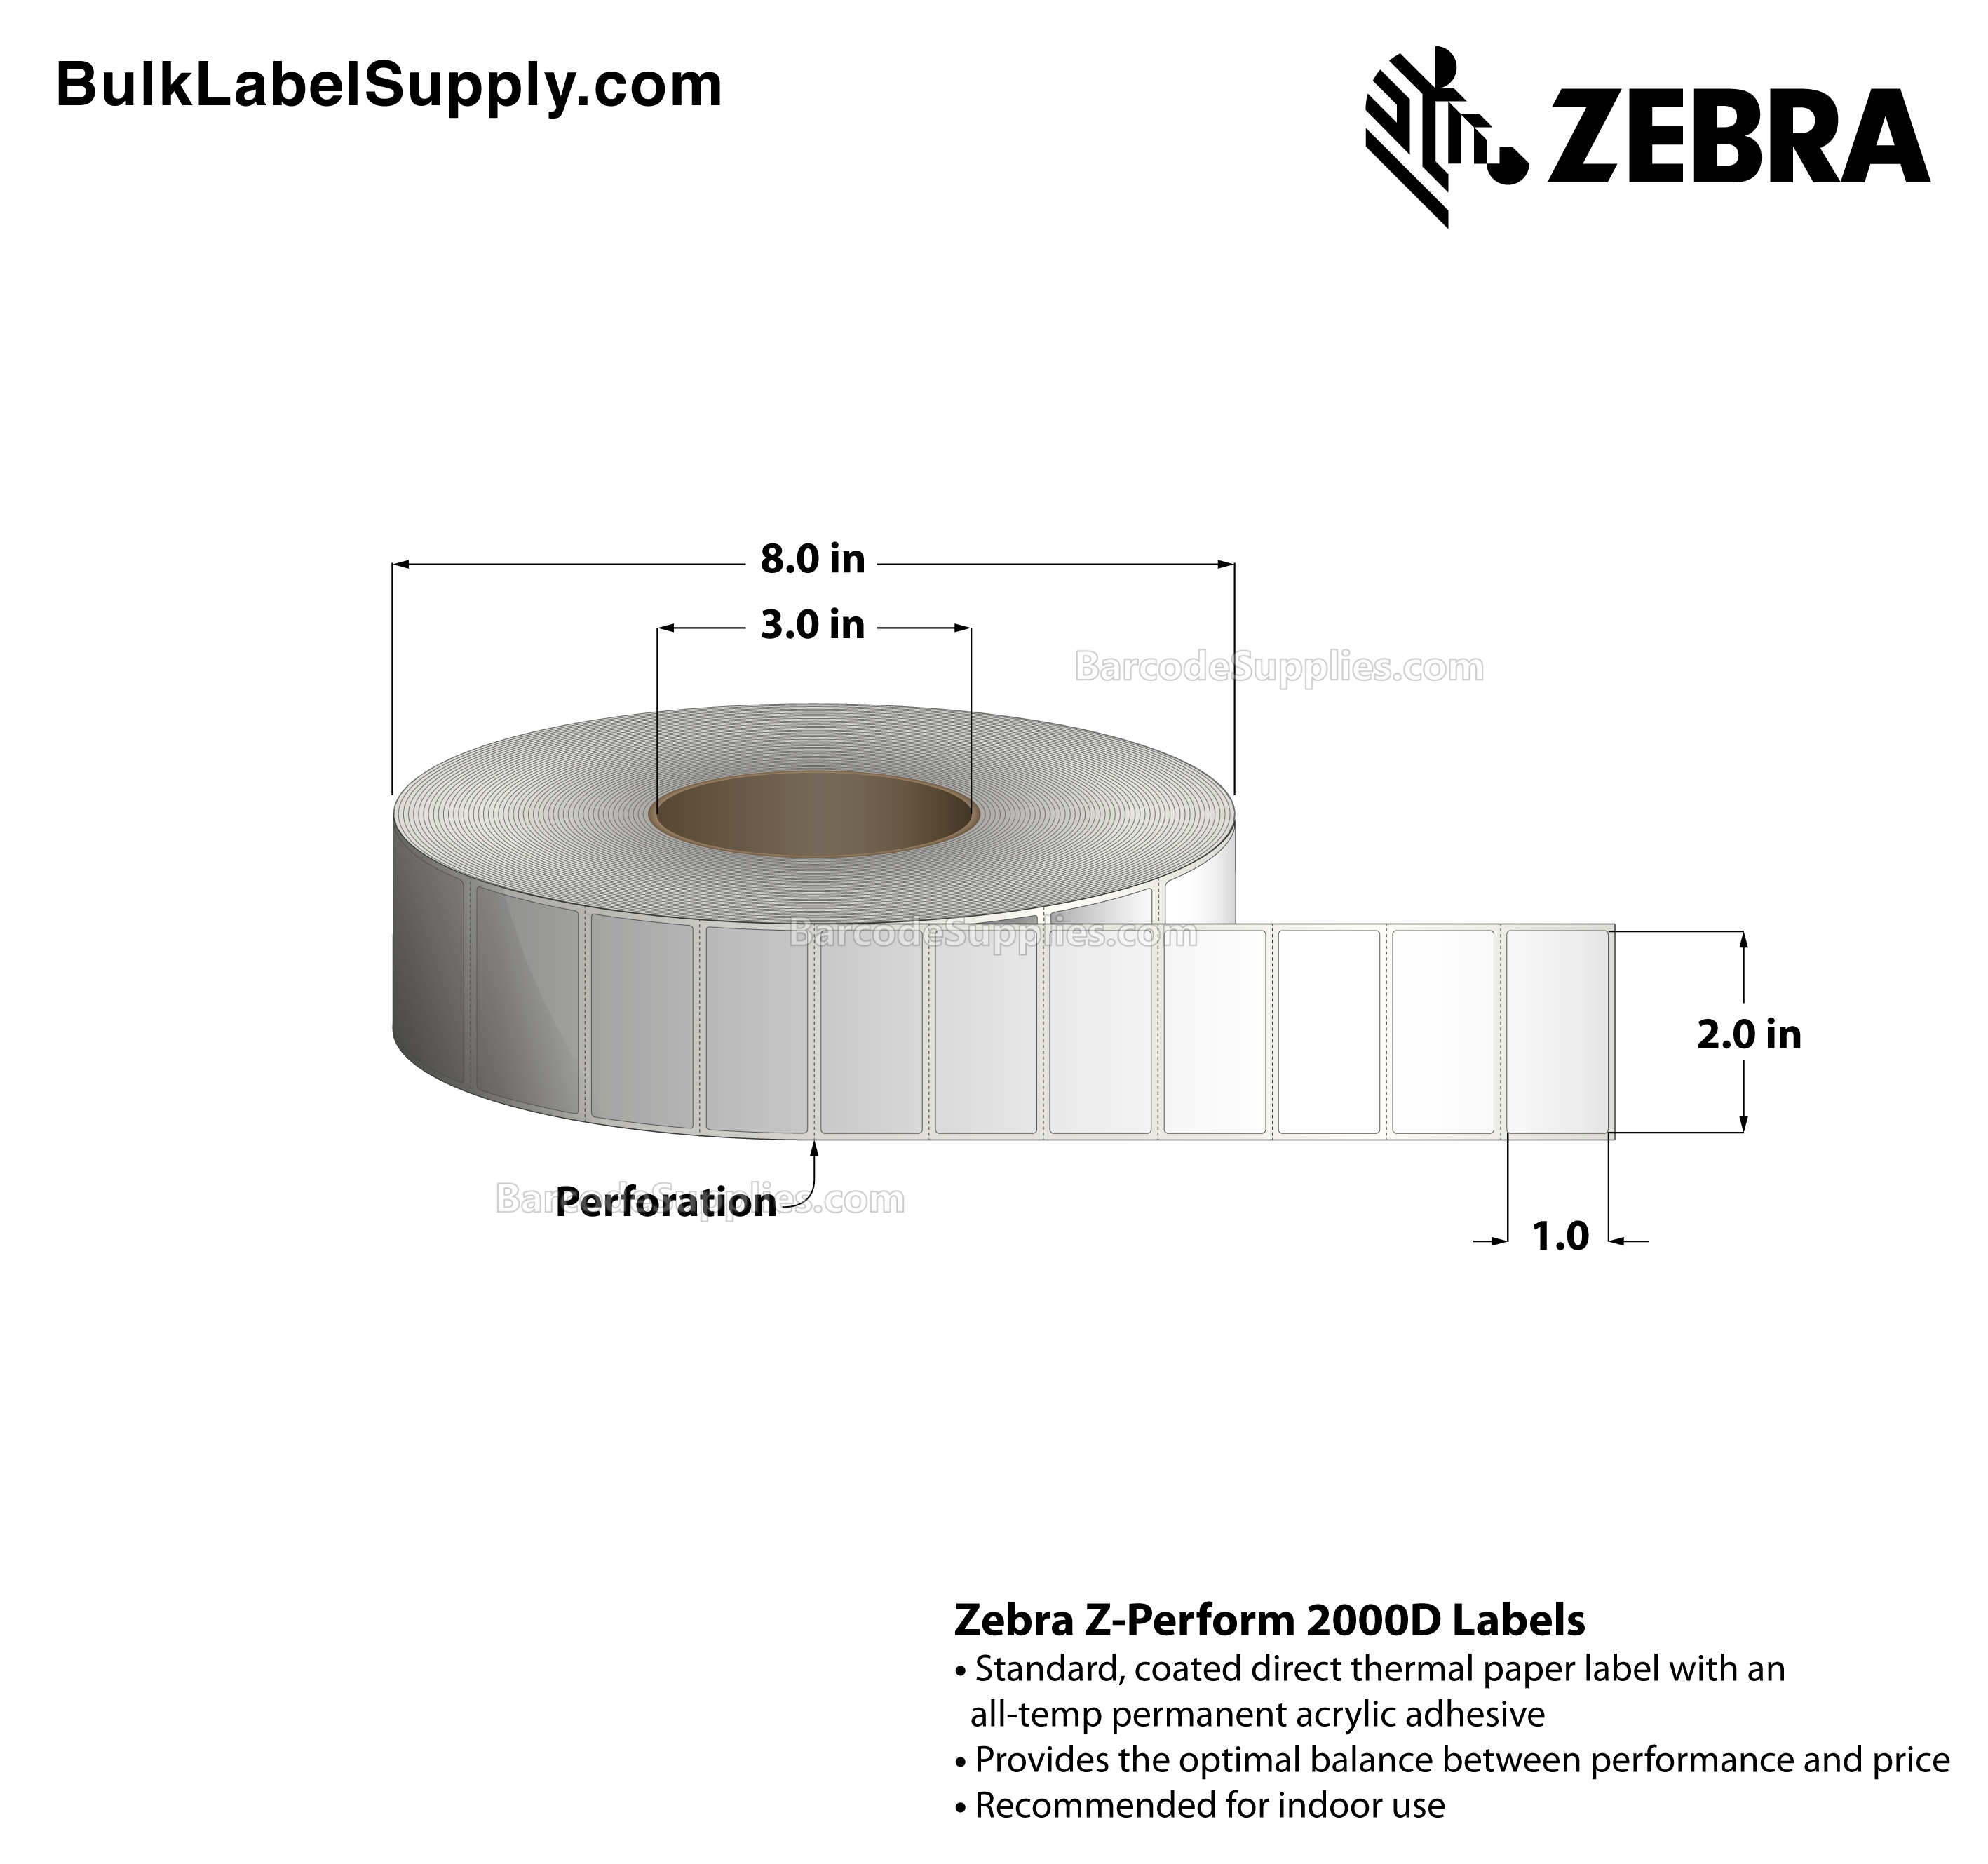 2 x 1 Direct Thermal White Z-Perform 2000D Labels With All-Temp Adhesive - Perforated - 5500 Labels Per Roll - Carton Of 8 Rolls - 44000 Labels Total - MPN: 10000298